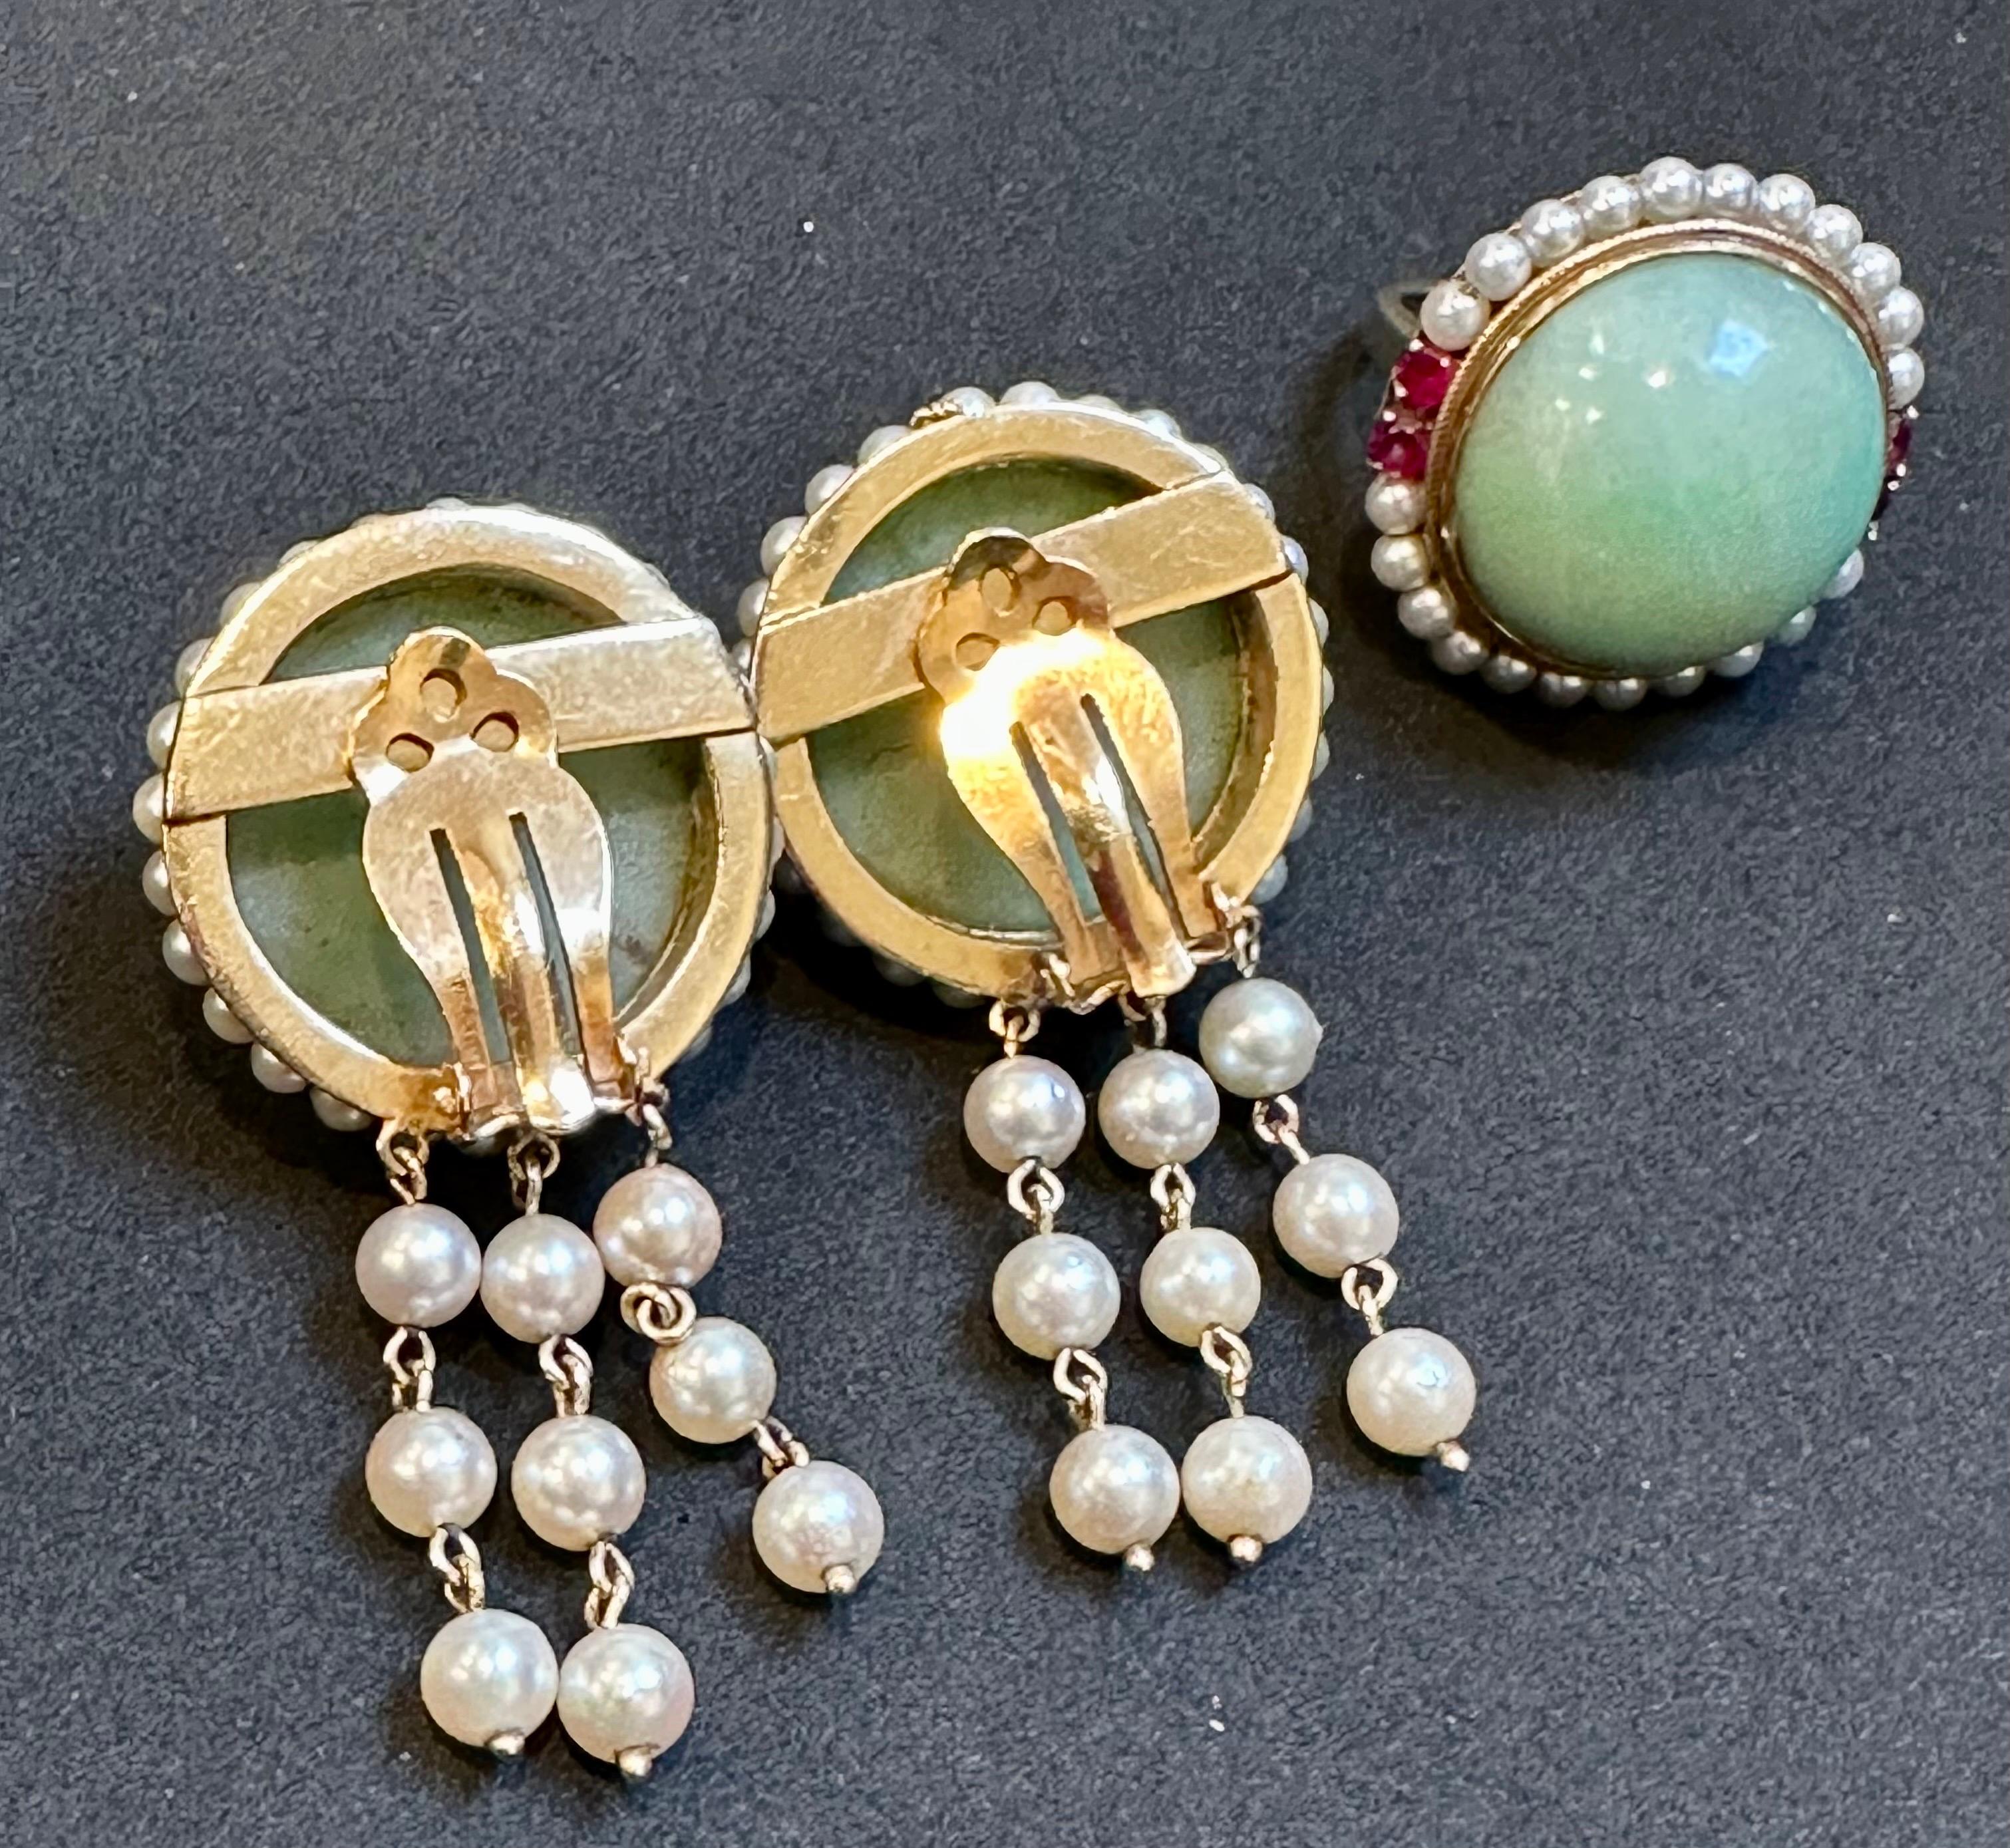 This Vintage Natural Jade Earring & Ring Set + Natural Pearls, 14 K Yellow Gold 48Gm is a stunning piece of jewelry that consists of approximately 60 Ct of Natural Jade with no treatment in the set of earring and ring. The jade stone is light in